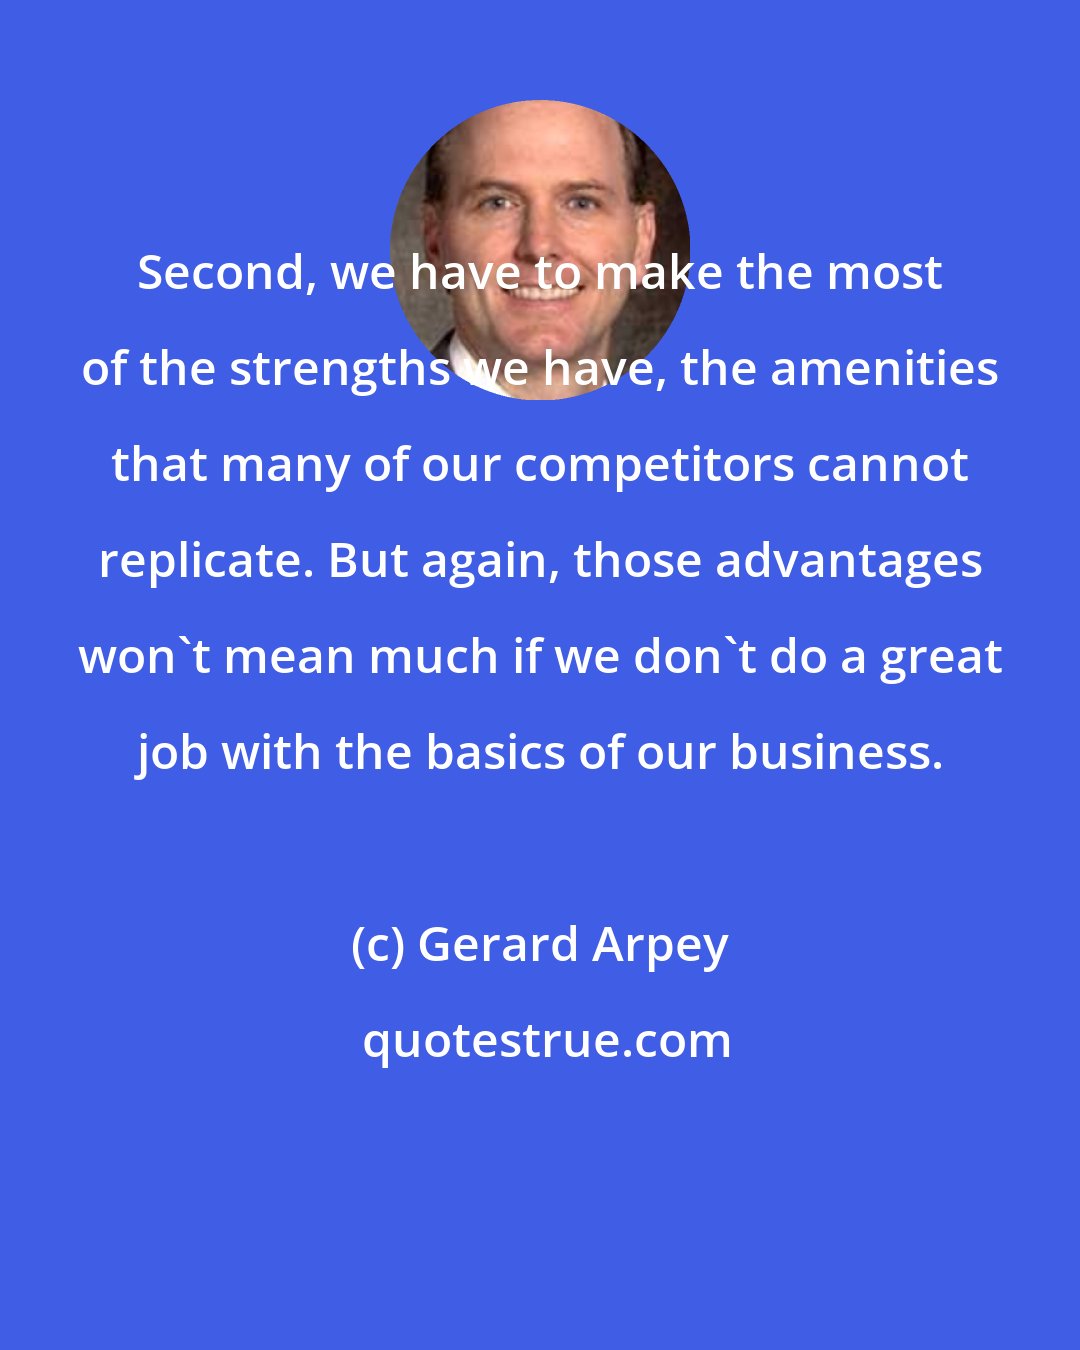 Gerard Arpey: Second, we have to make the most of the strengths we have, the amenities that many of our competitors cannot replicate. But again, those advantages won't mean much if we don't do a great job with the basics of our business.